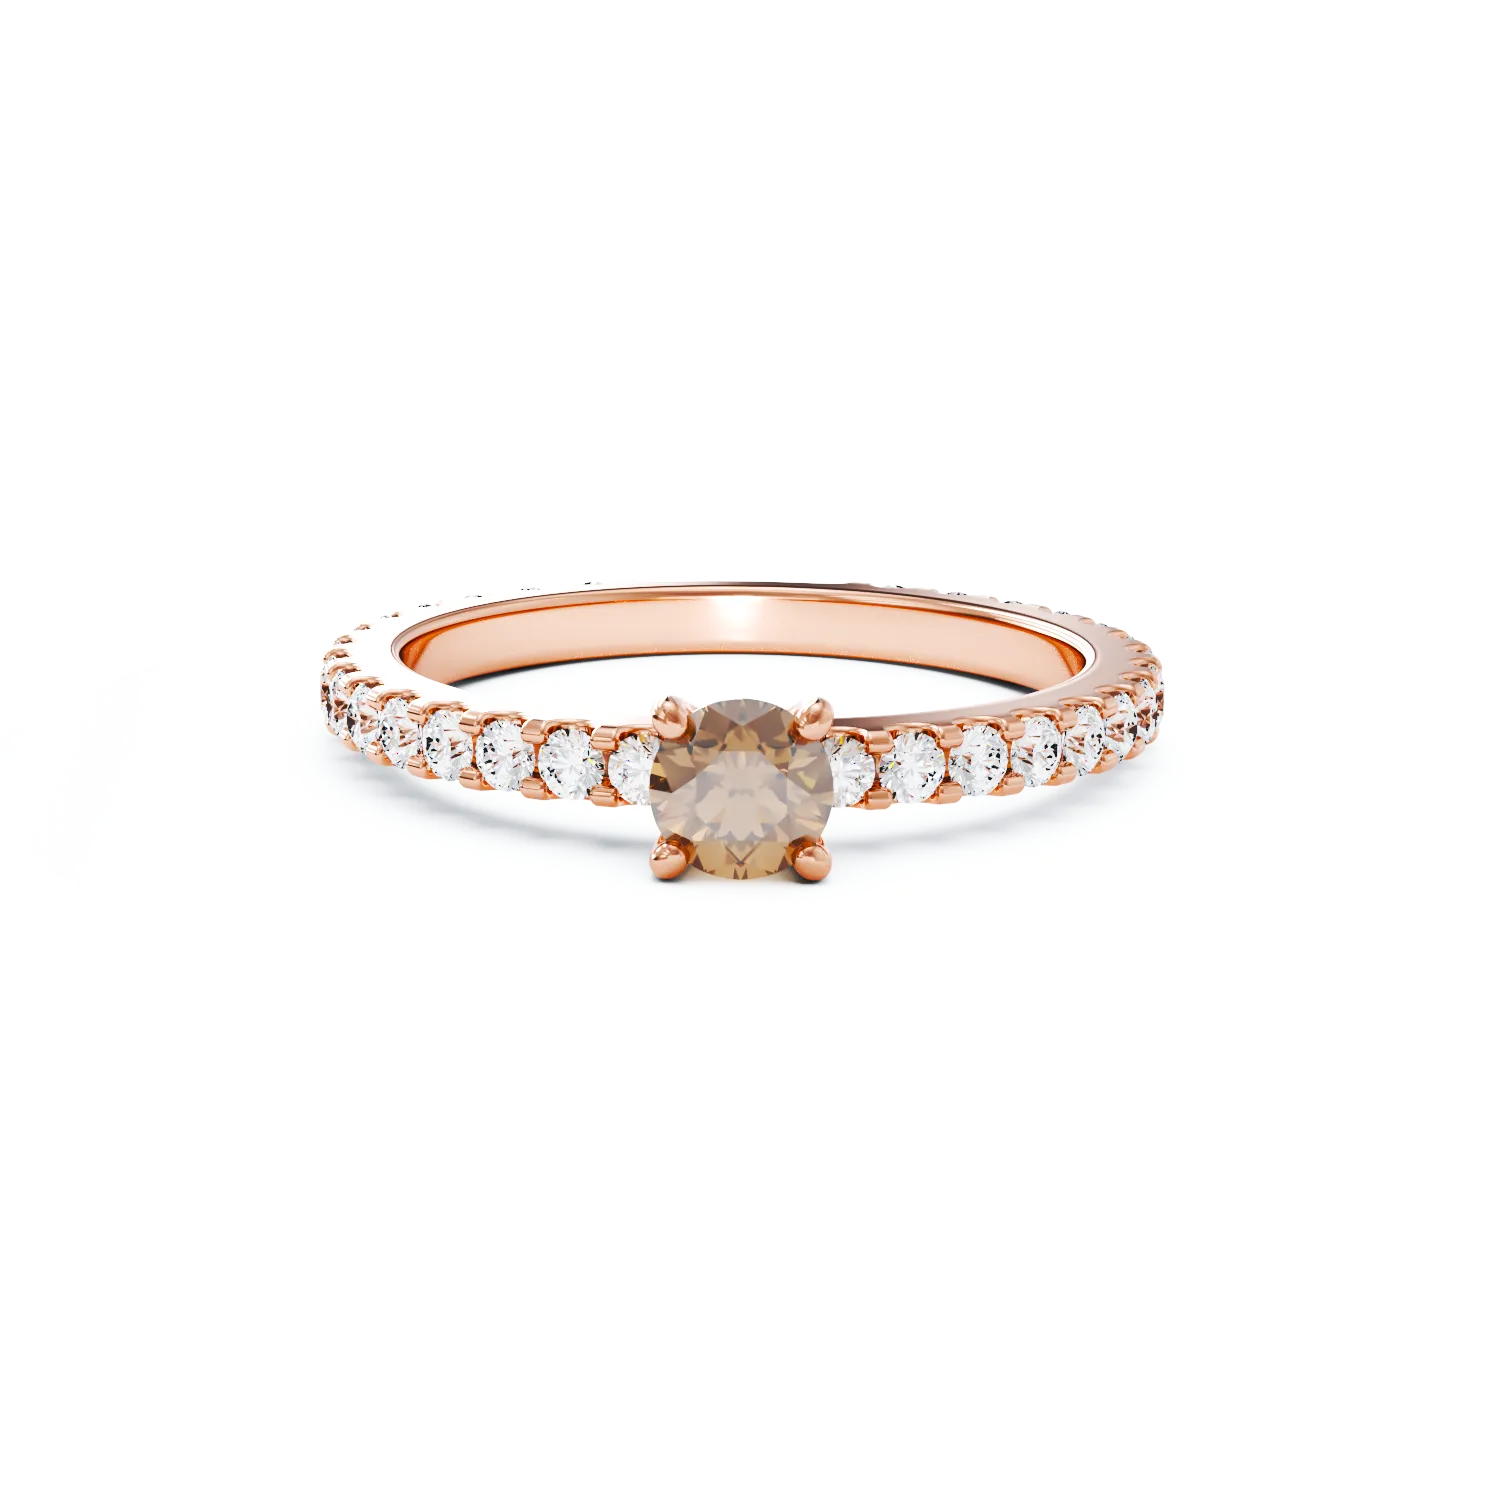 18K rose gold engagement ring with brown diamond of 0.31ct and diamonds of 0.49ct